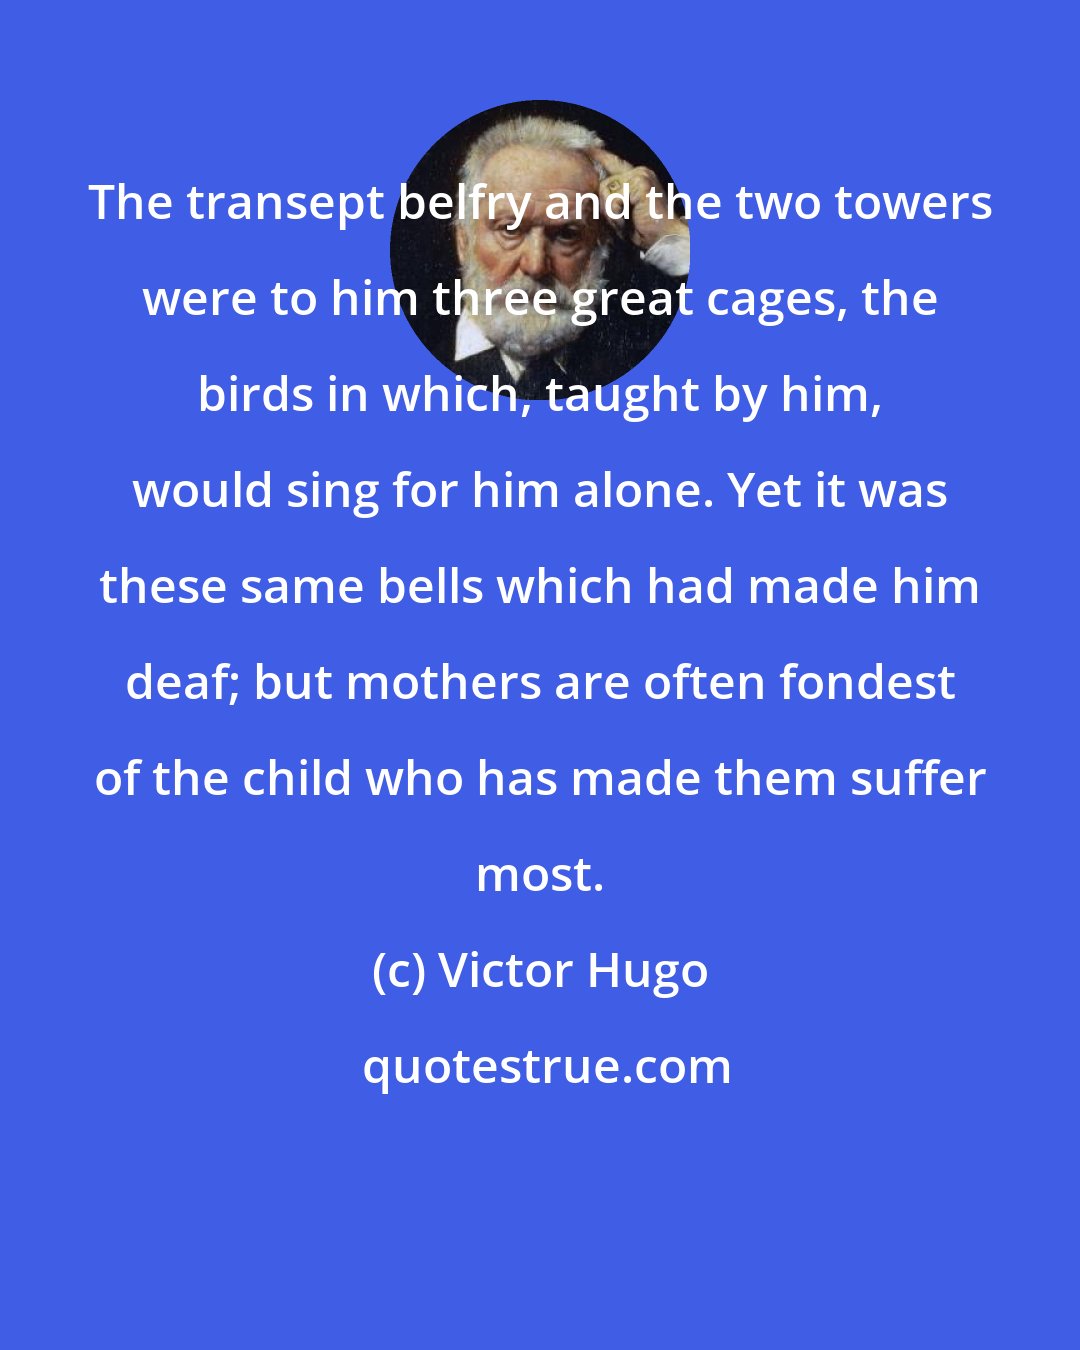 Victor Hugo: The transept belfry and the two towers were to him three great cages, the birds in which, taught by him, would sing for him alone. Yet it was these same bells which had made him deaf; but mothers are often fondest of the child who has made them suffer most.